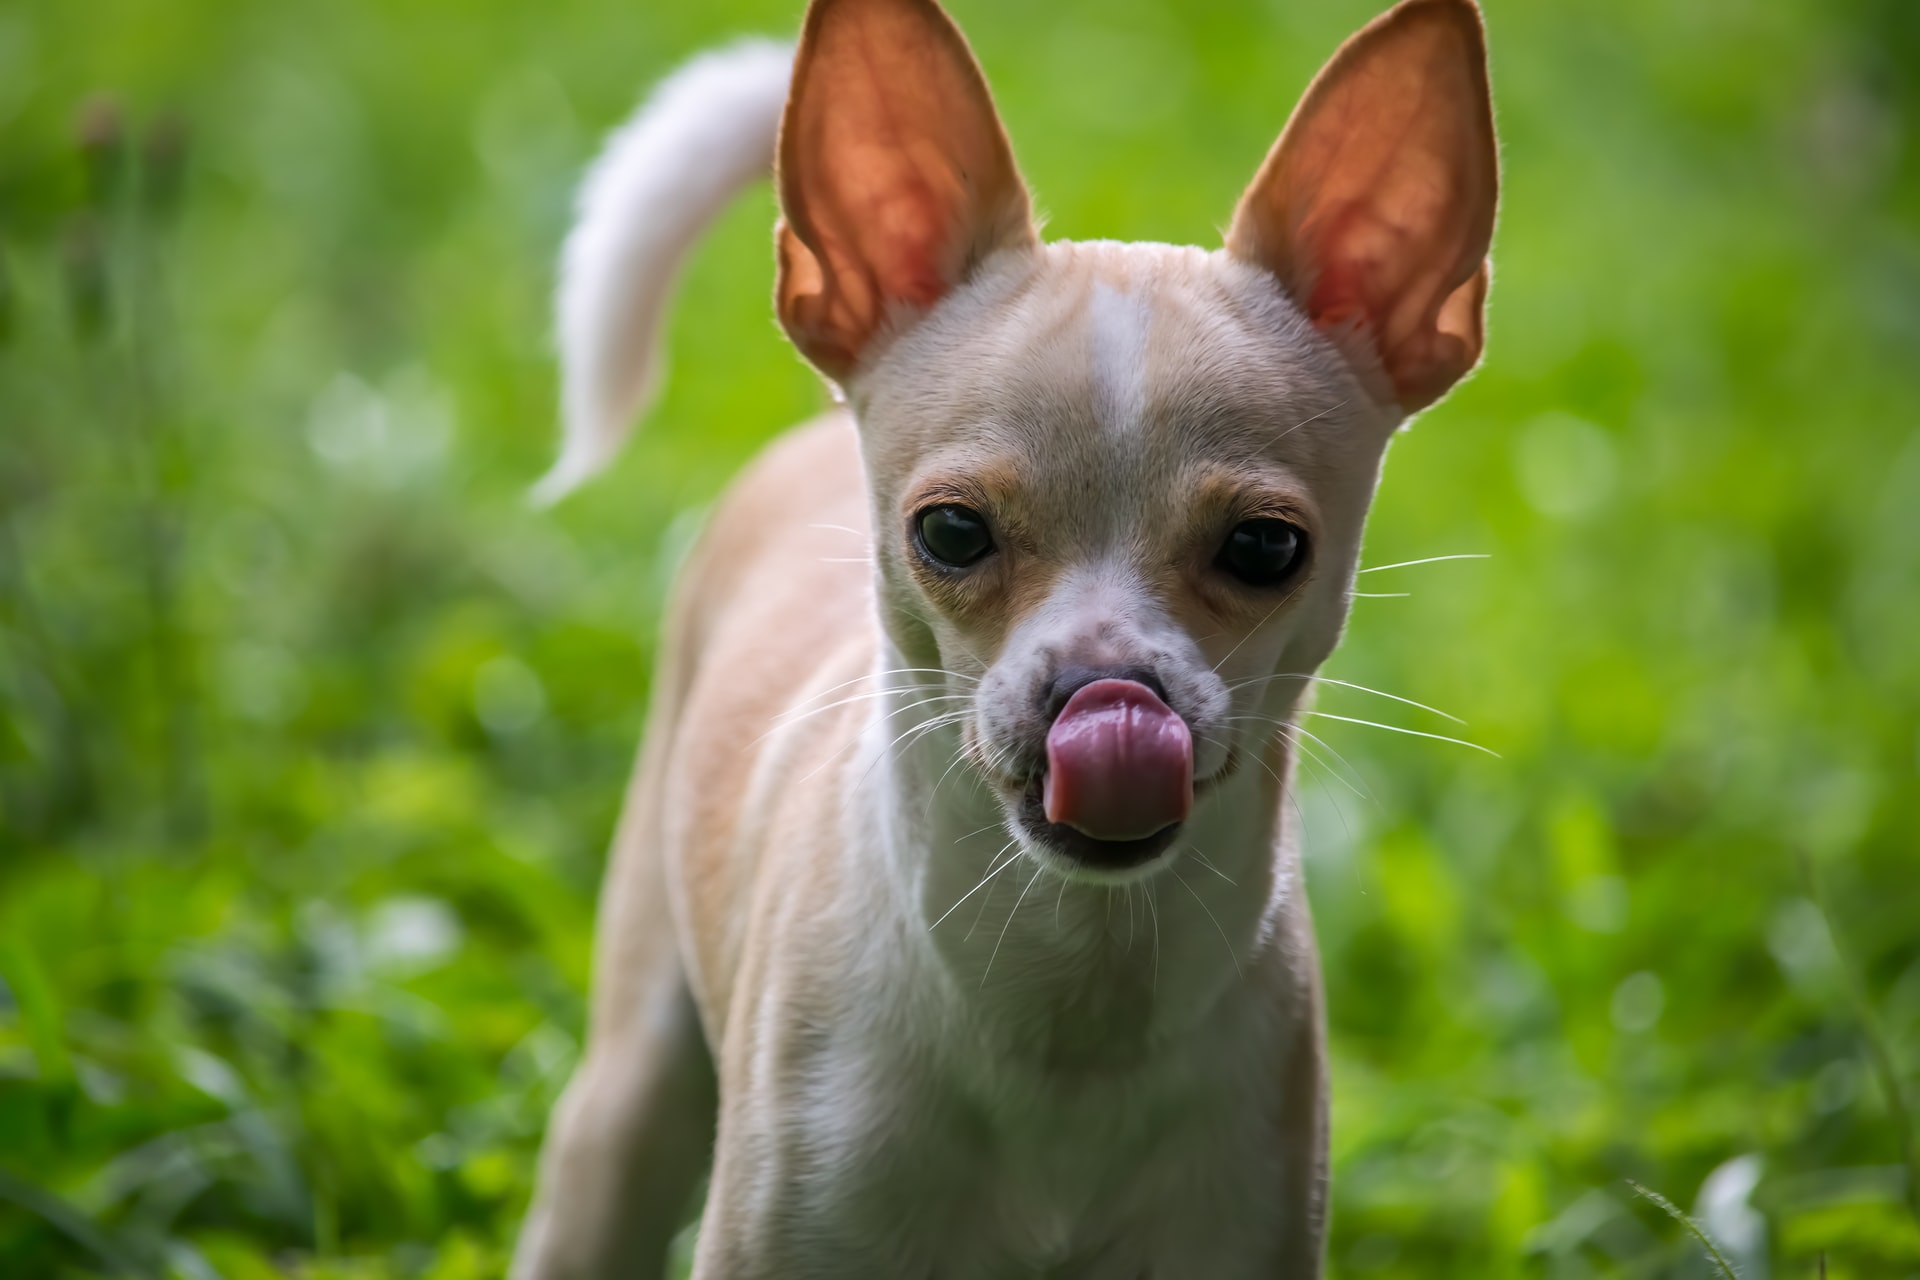 Water Should a Chihuahua Drink